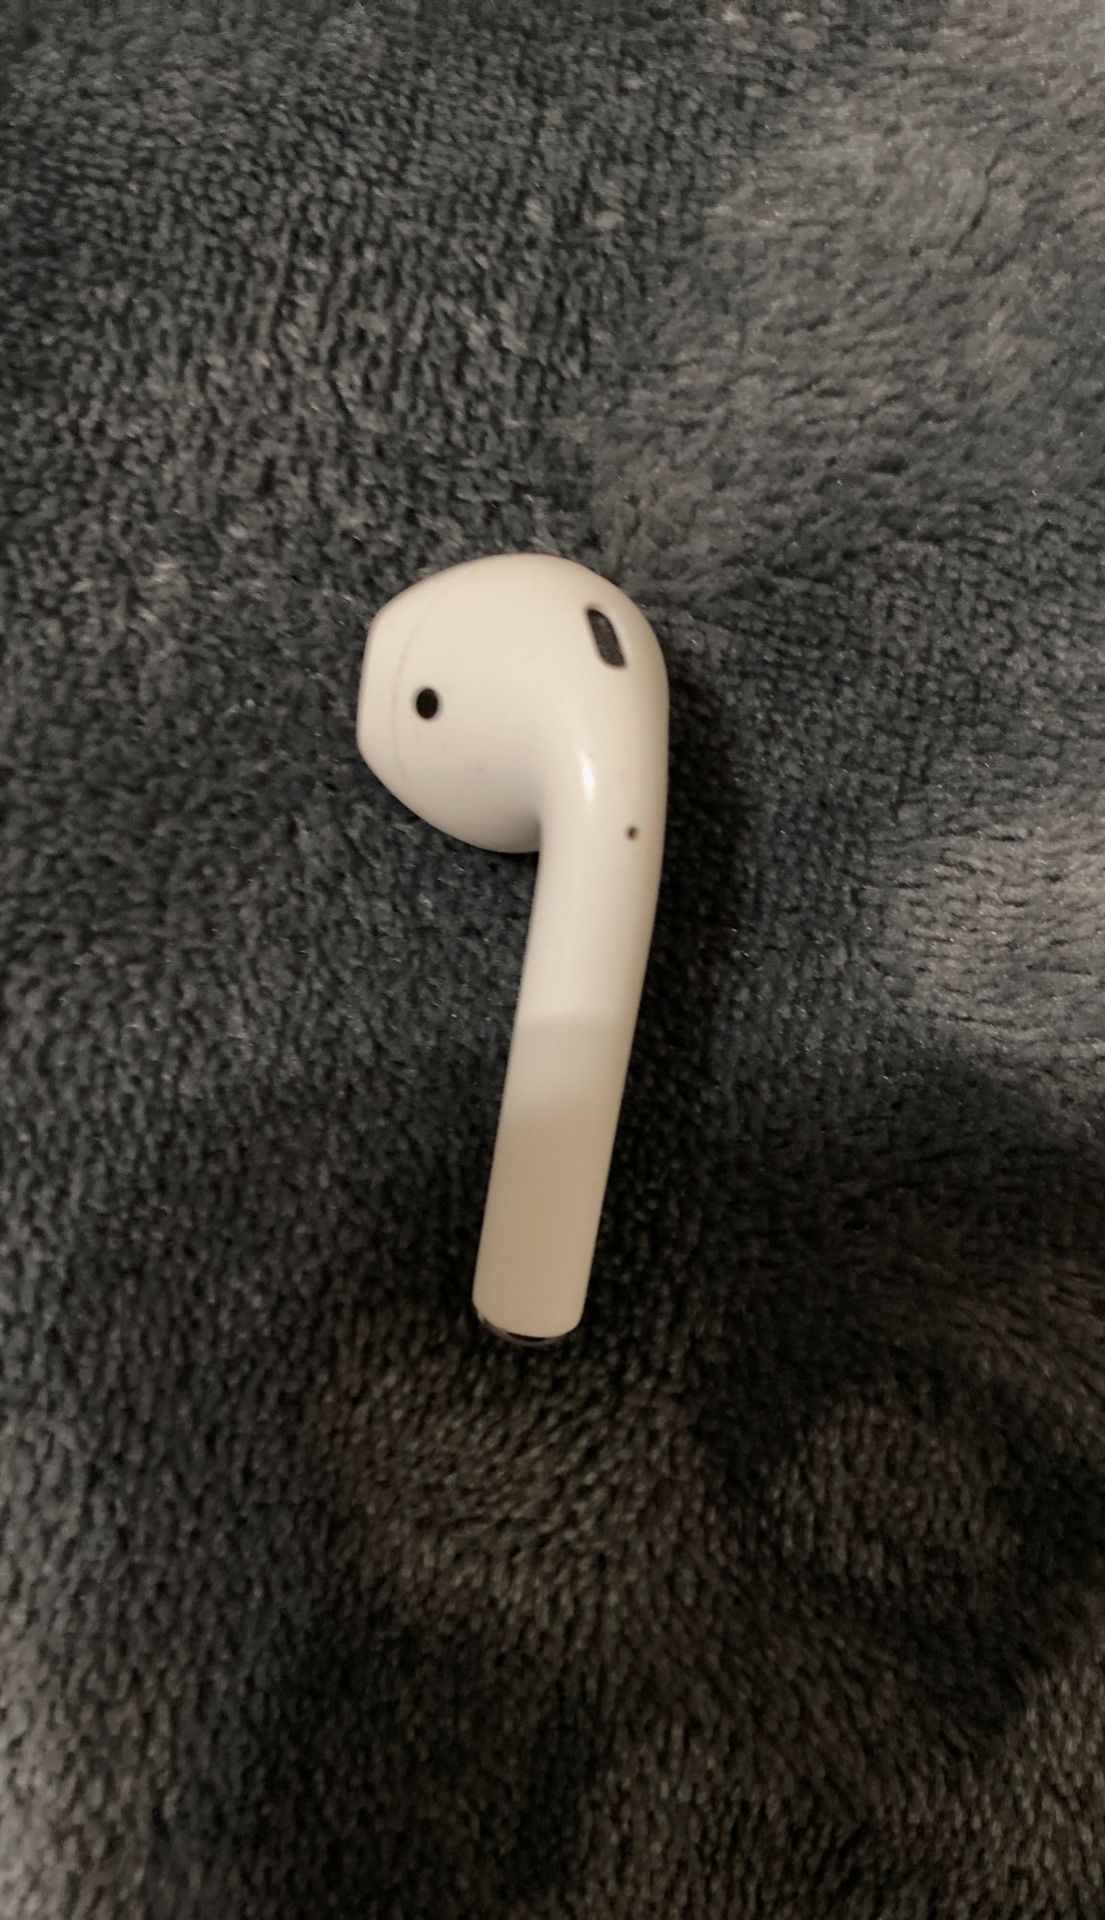 Lost my AirPod box only have the left one